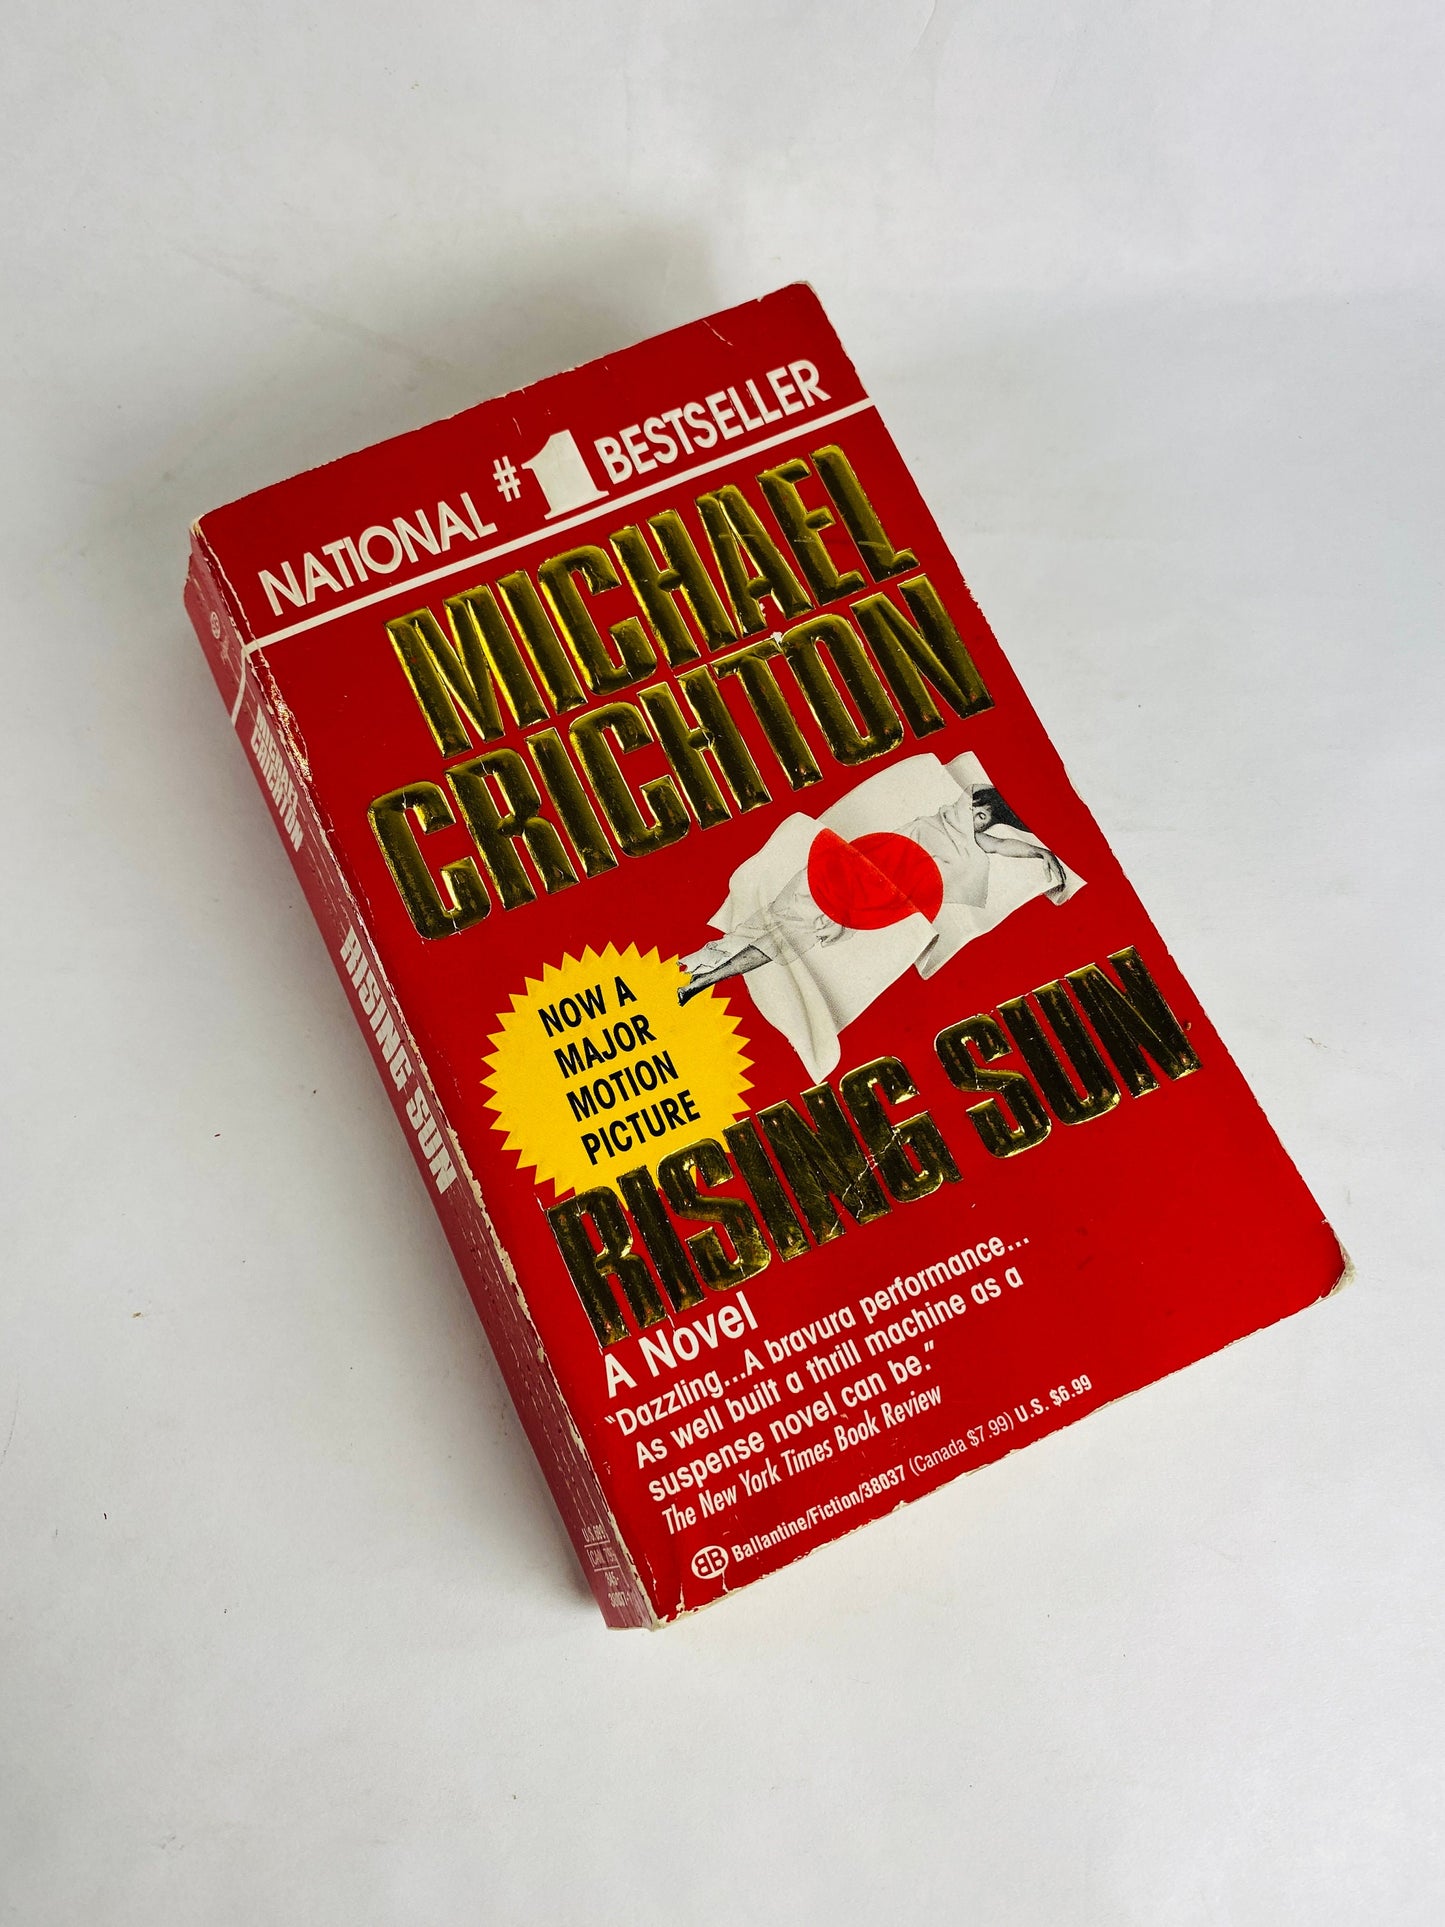 Rising Sun by Michael Crichton vintage paperback book circa 1992 set in Japan where business moguls compete for electronics industry